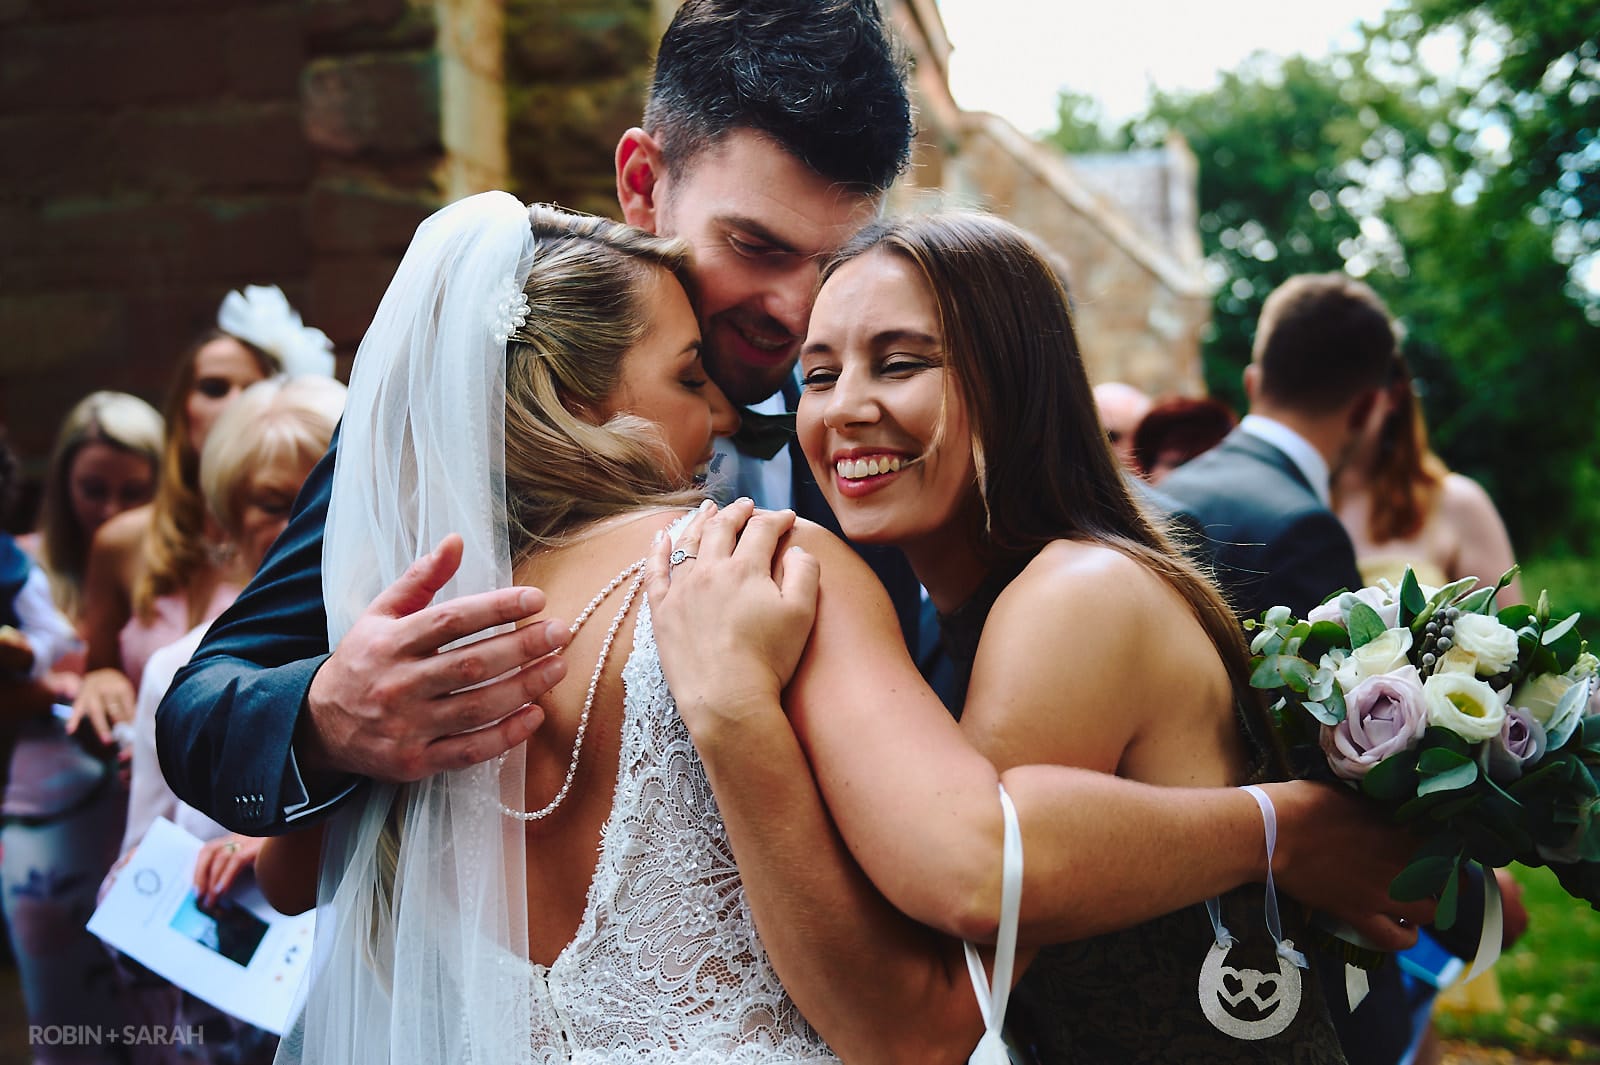 Bride hugged by two wedding guests after church ceremony